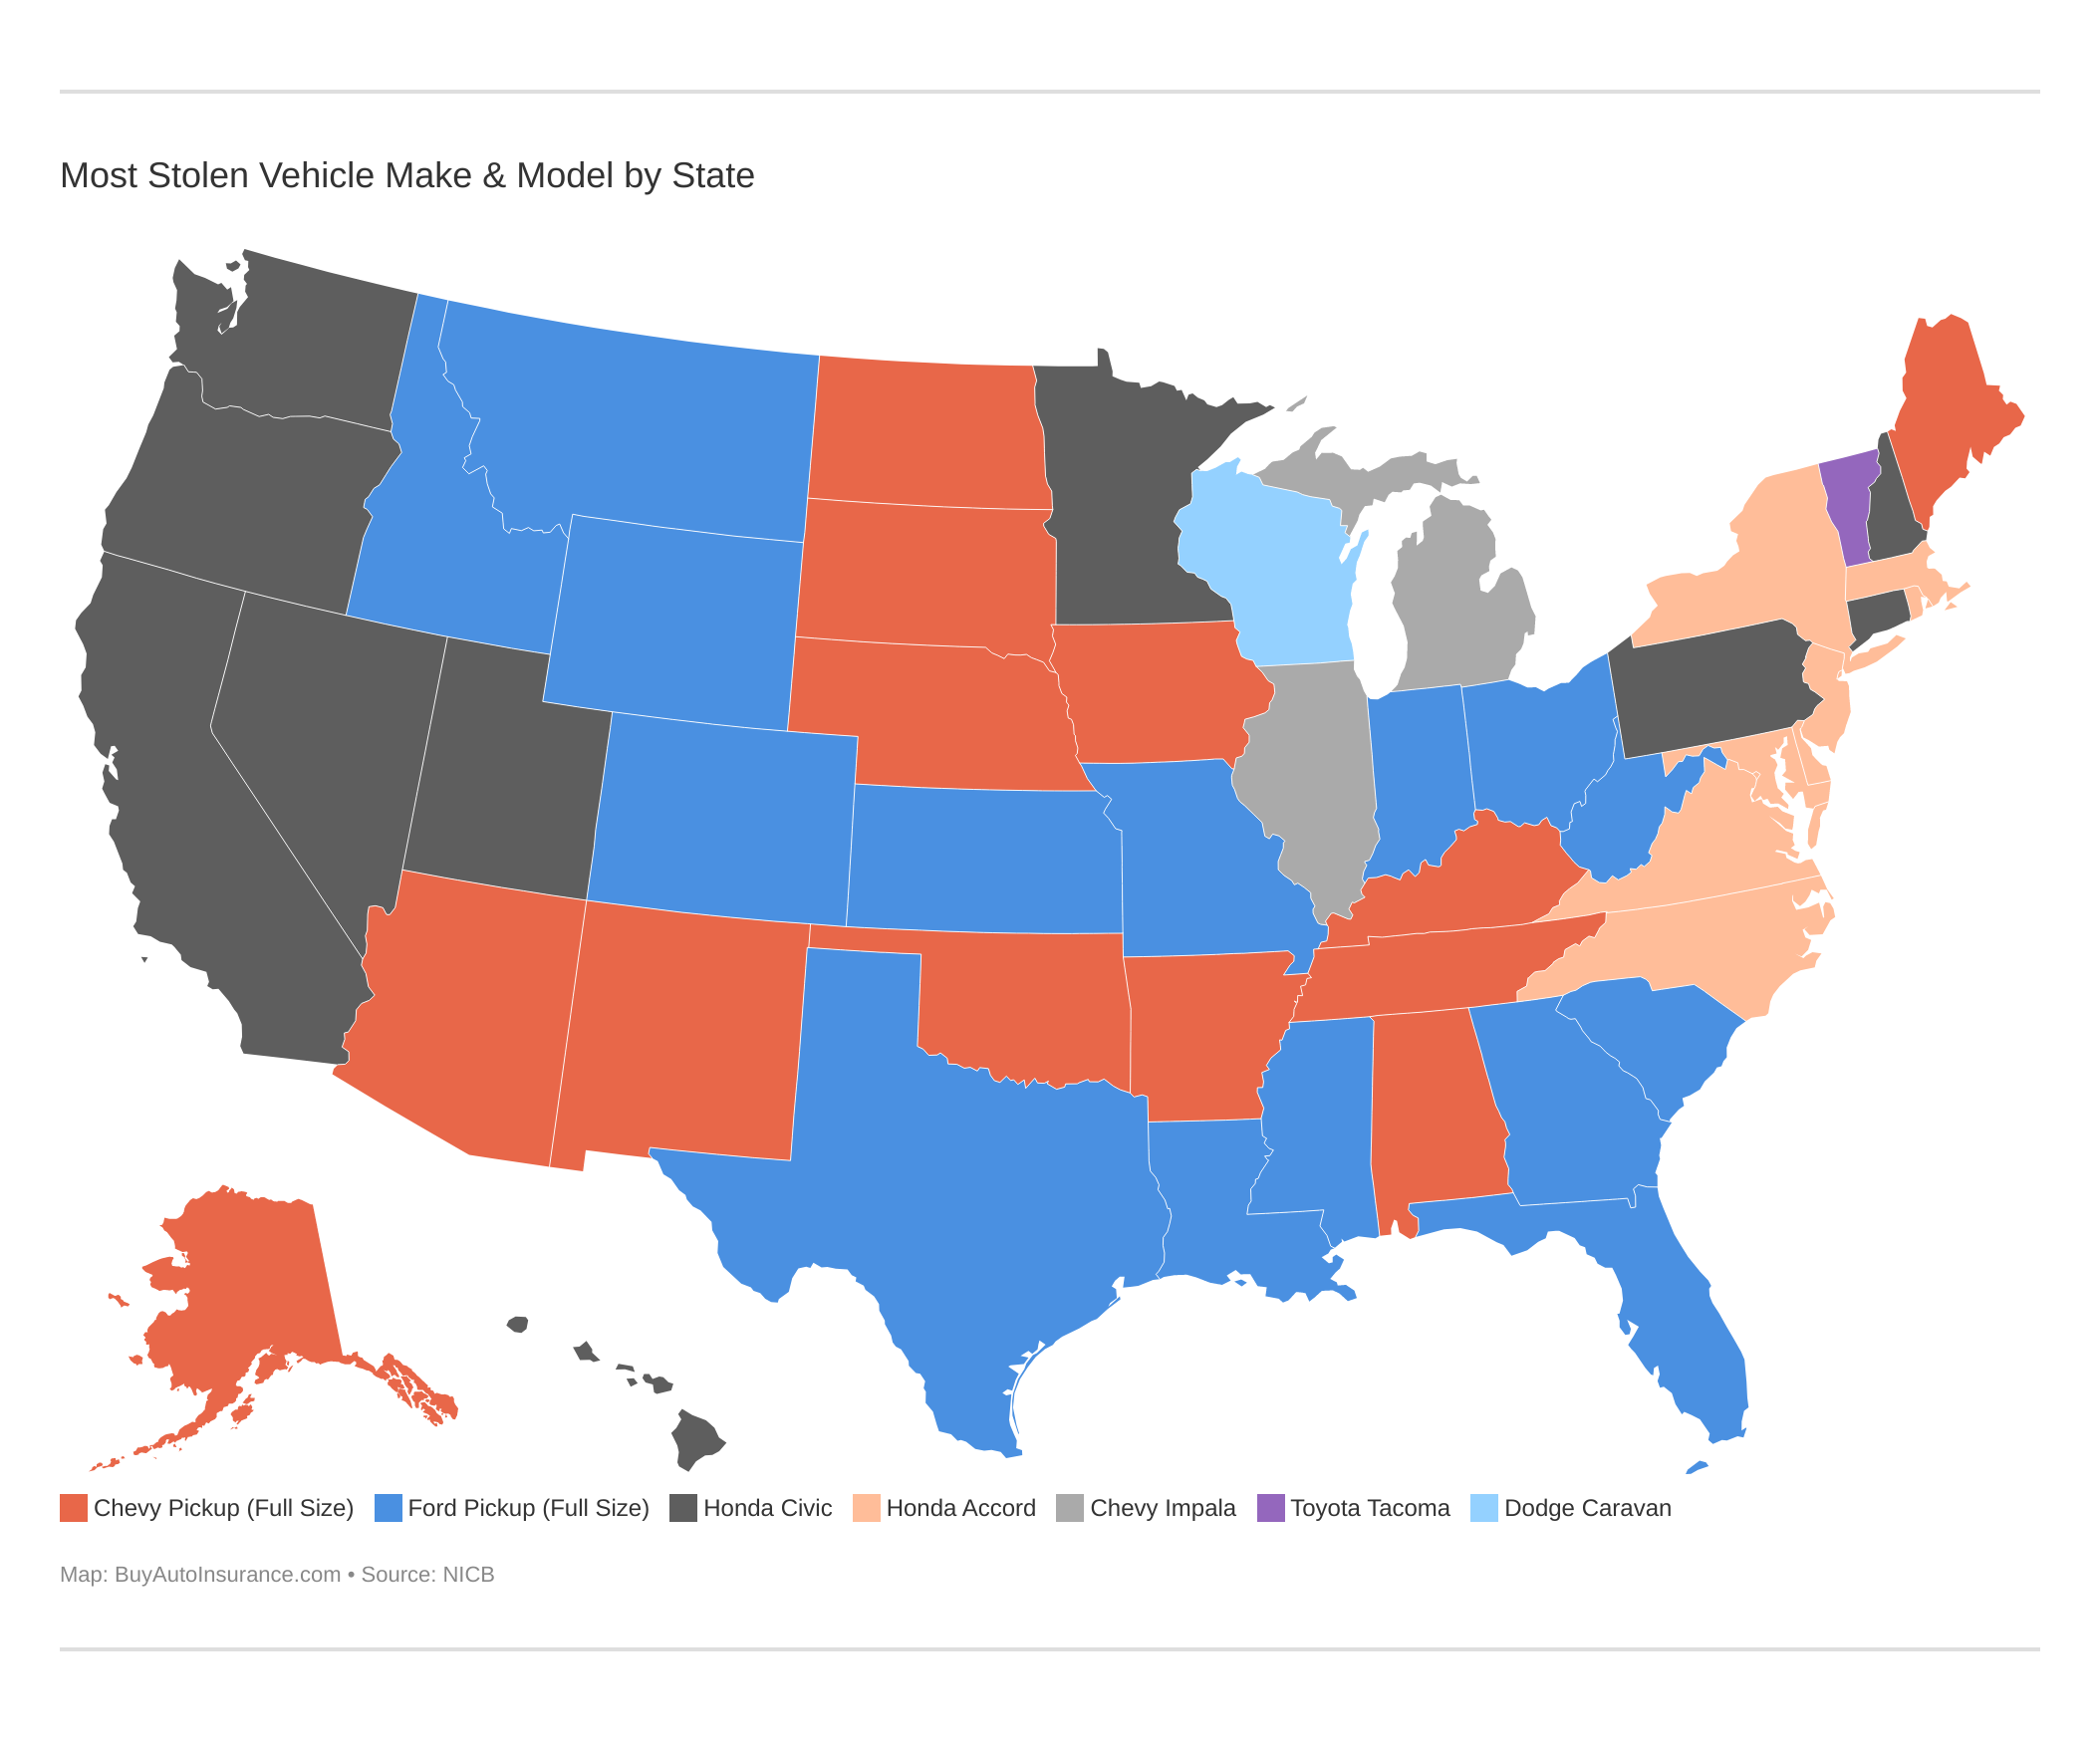 Most Stolen Vehicle Make & Model by State